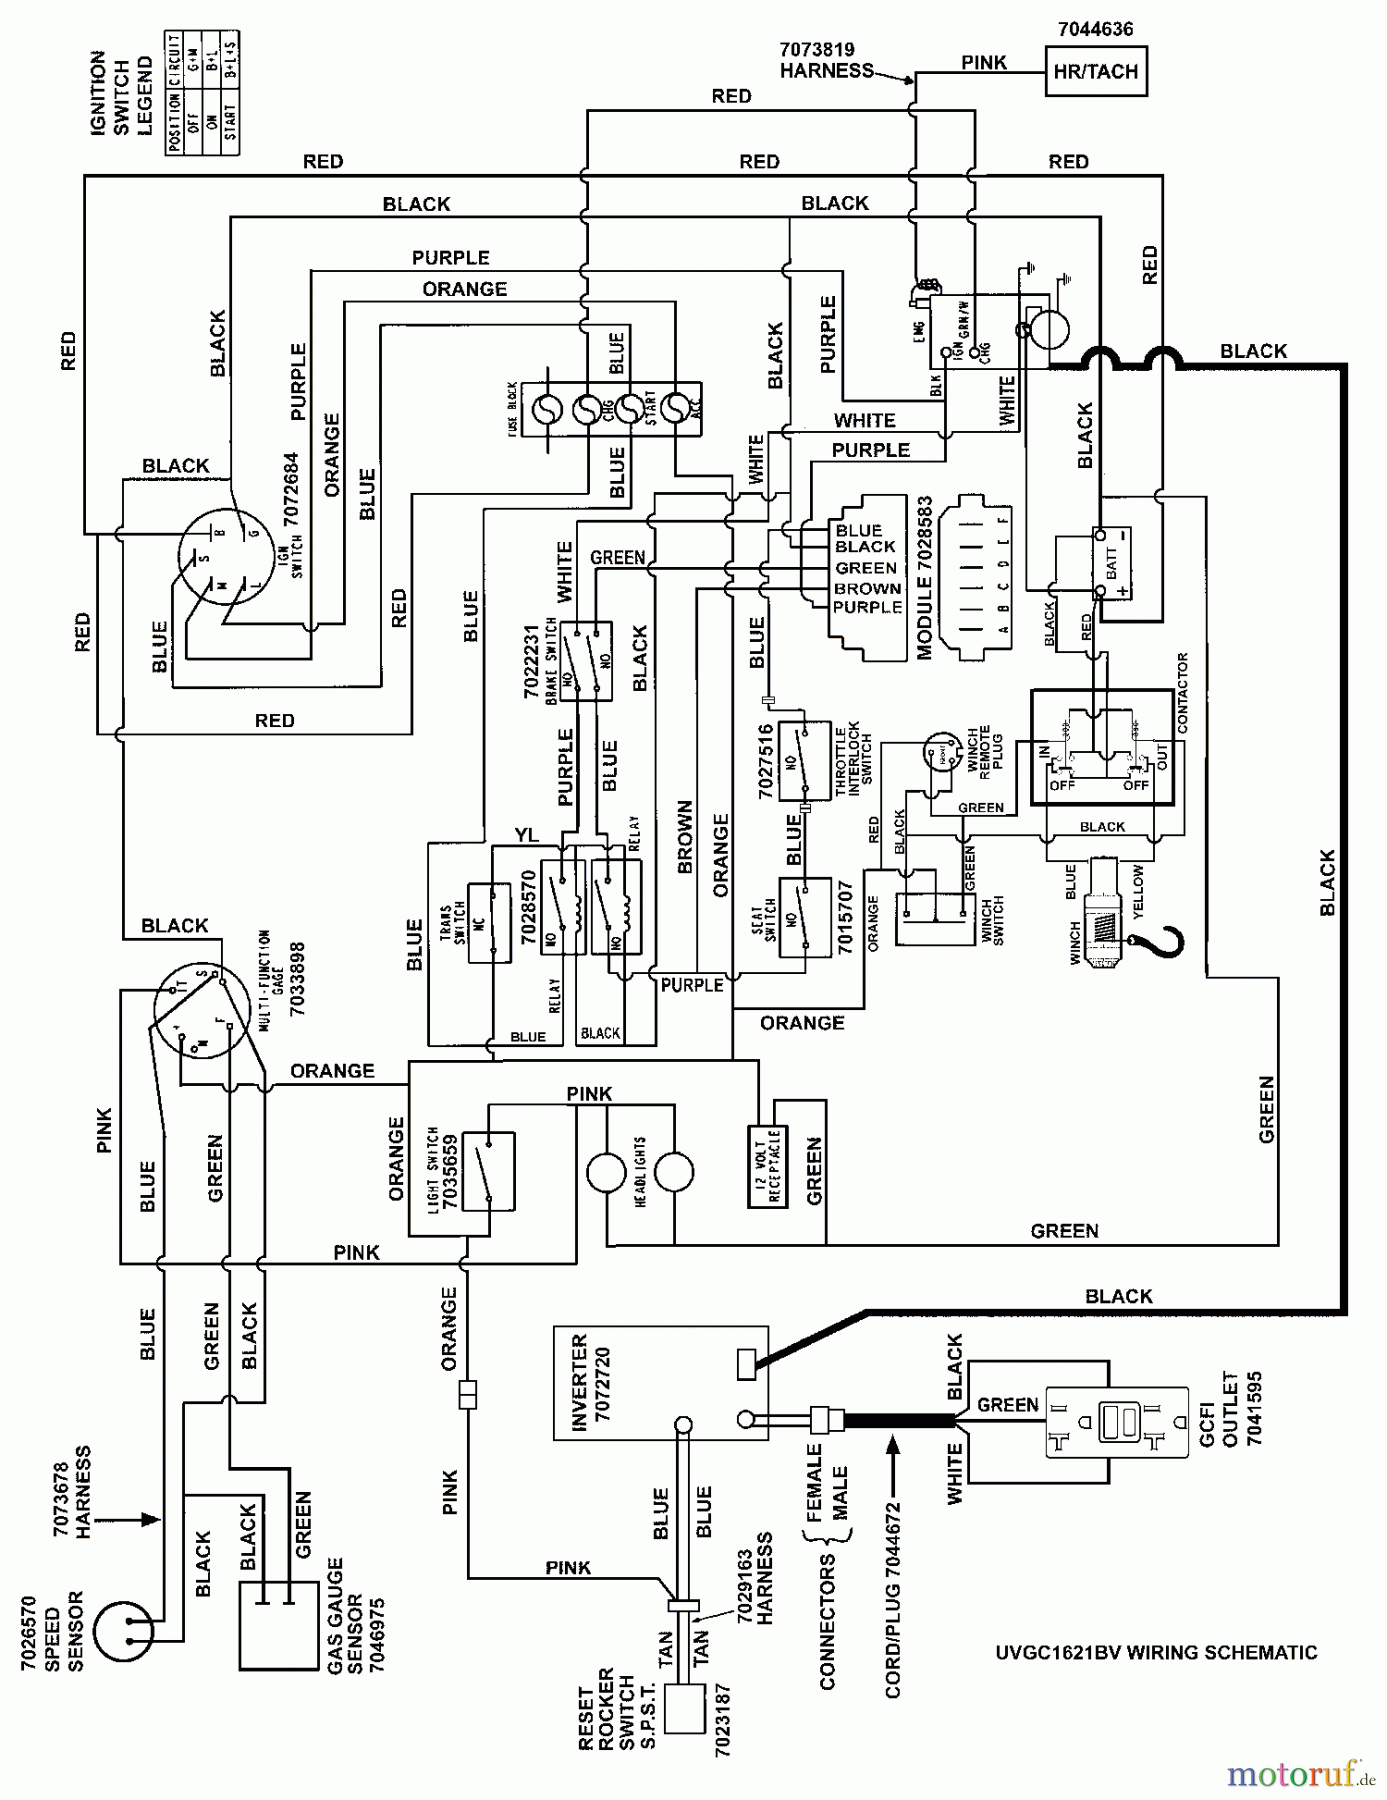  Snapper Utility Vehicles UVGT1621BV (7085903) - Snapper Trail Cruiser Utility Vehicle, 16 HP, Series 1 WIRING SCHEMATIC- UVGT (UVGC) Model